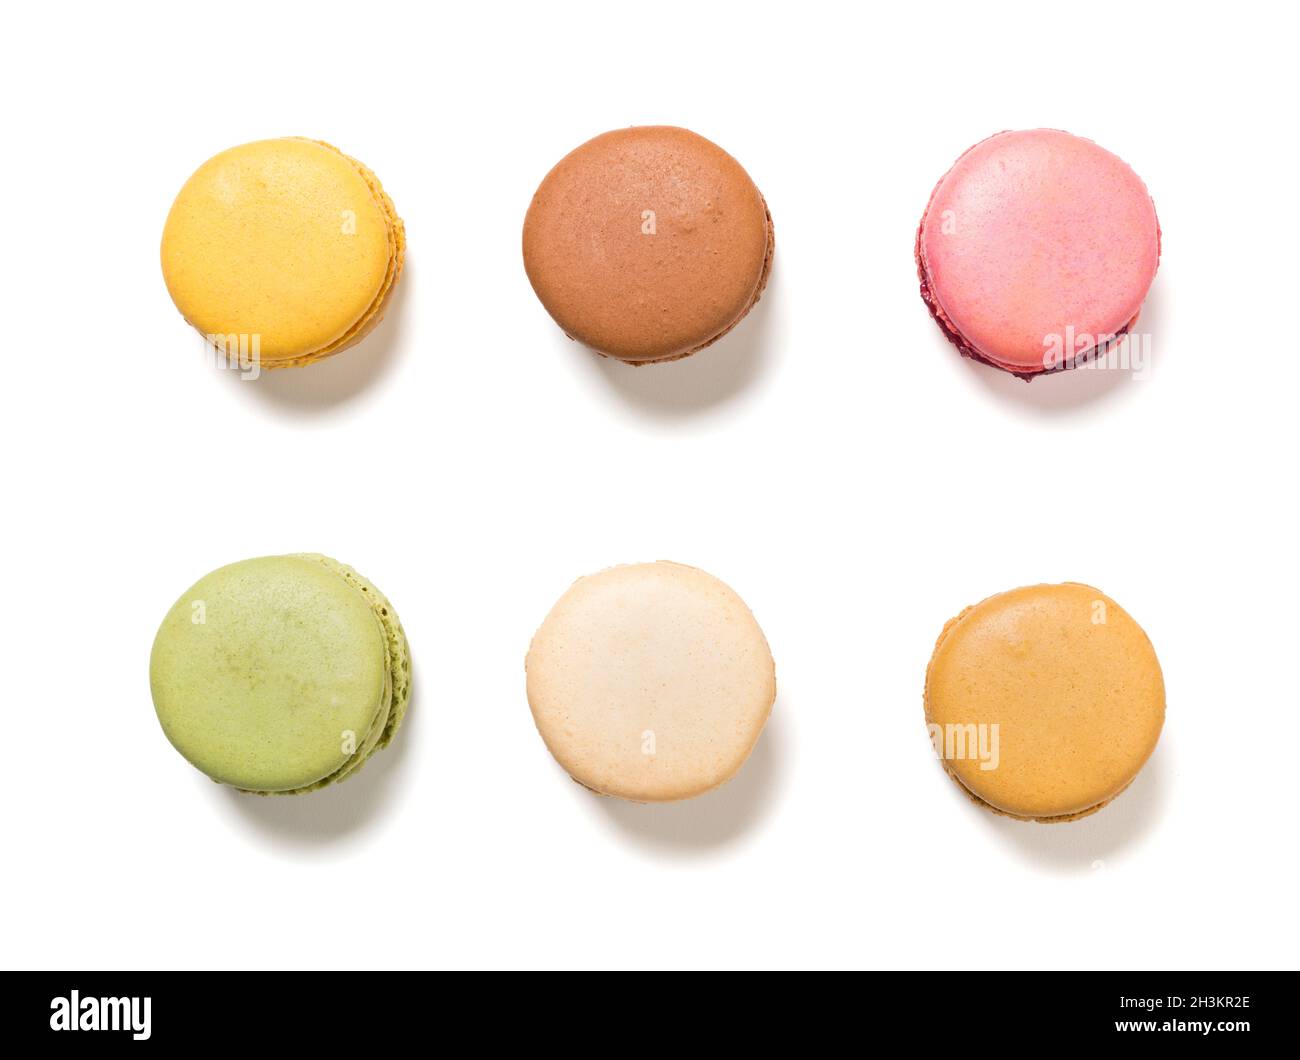 Variety of pastel colored macarons pastry, isolated on white background. Flat lay high angle view of delicious french cookies. Stock Photo